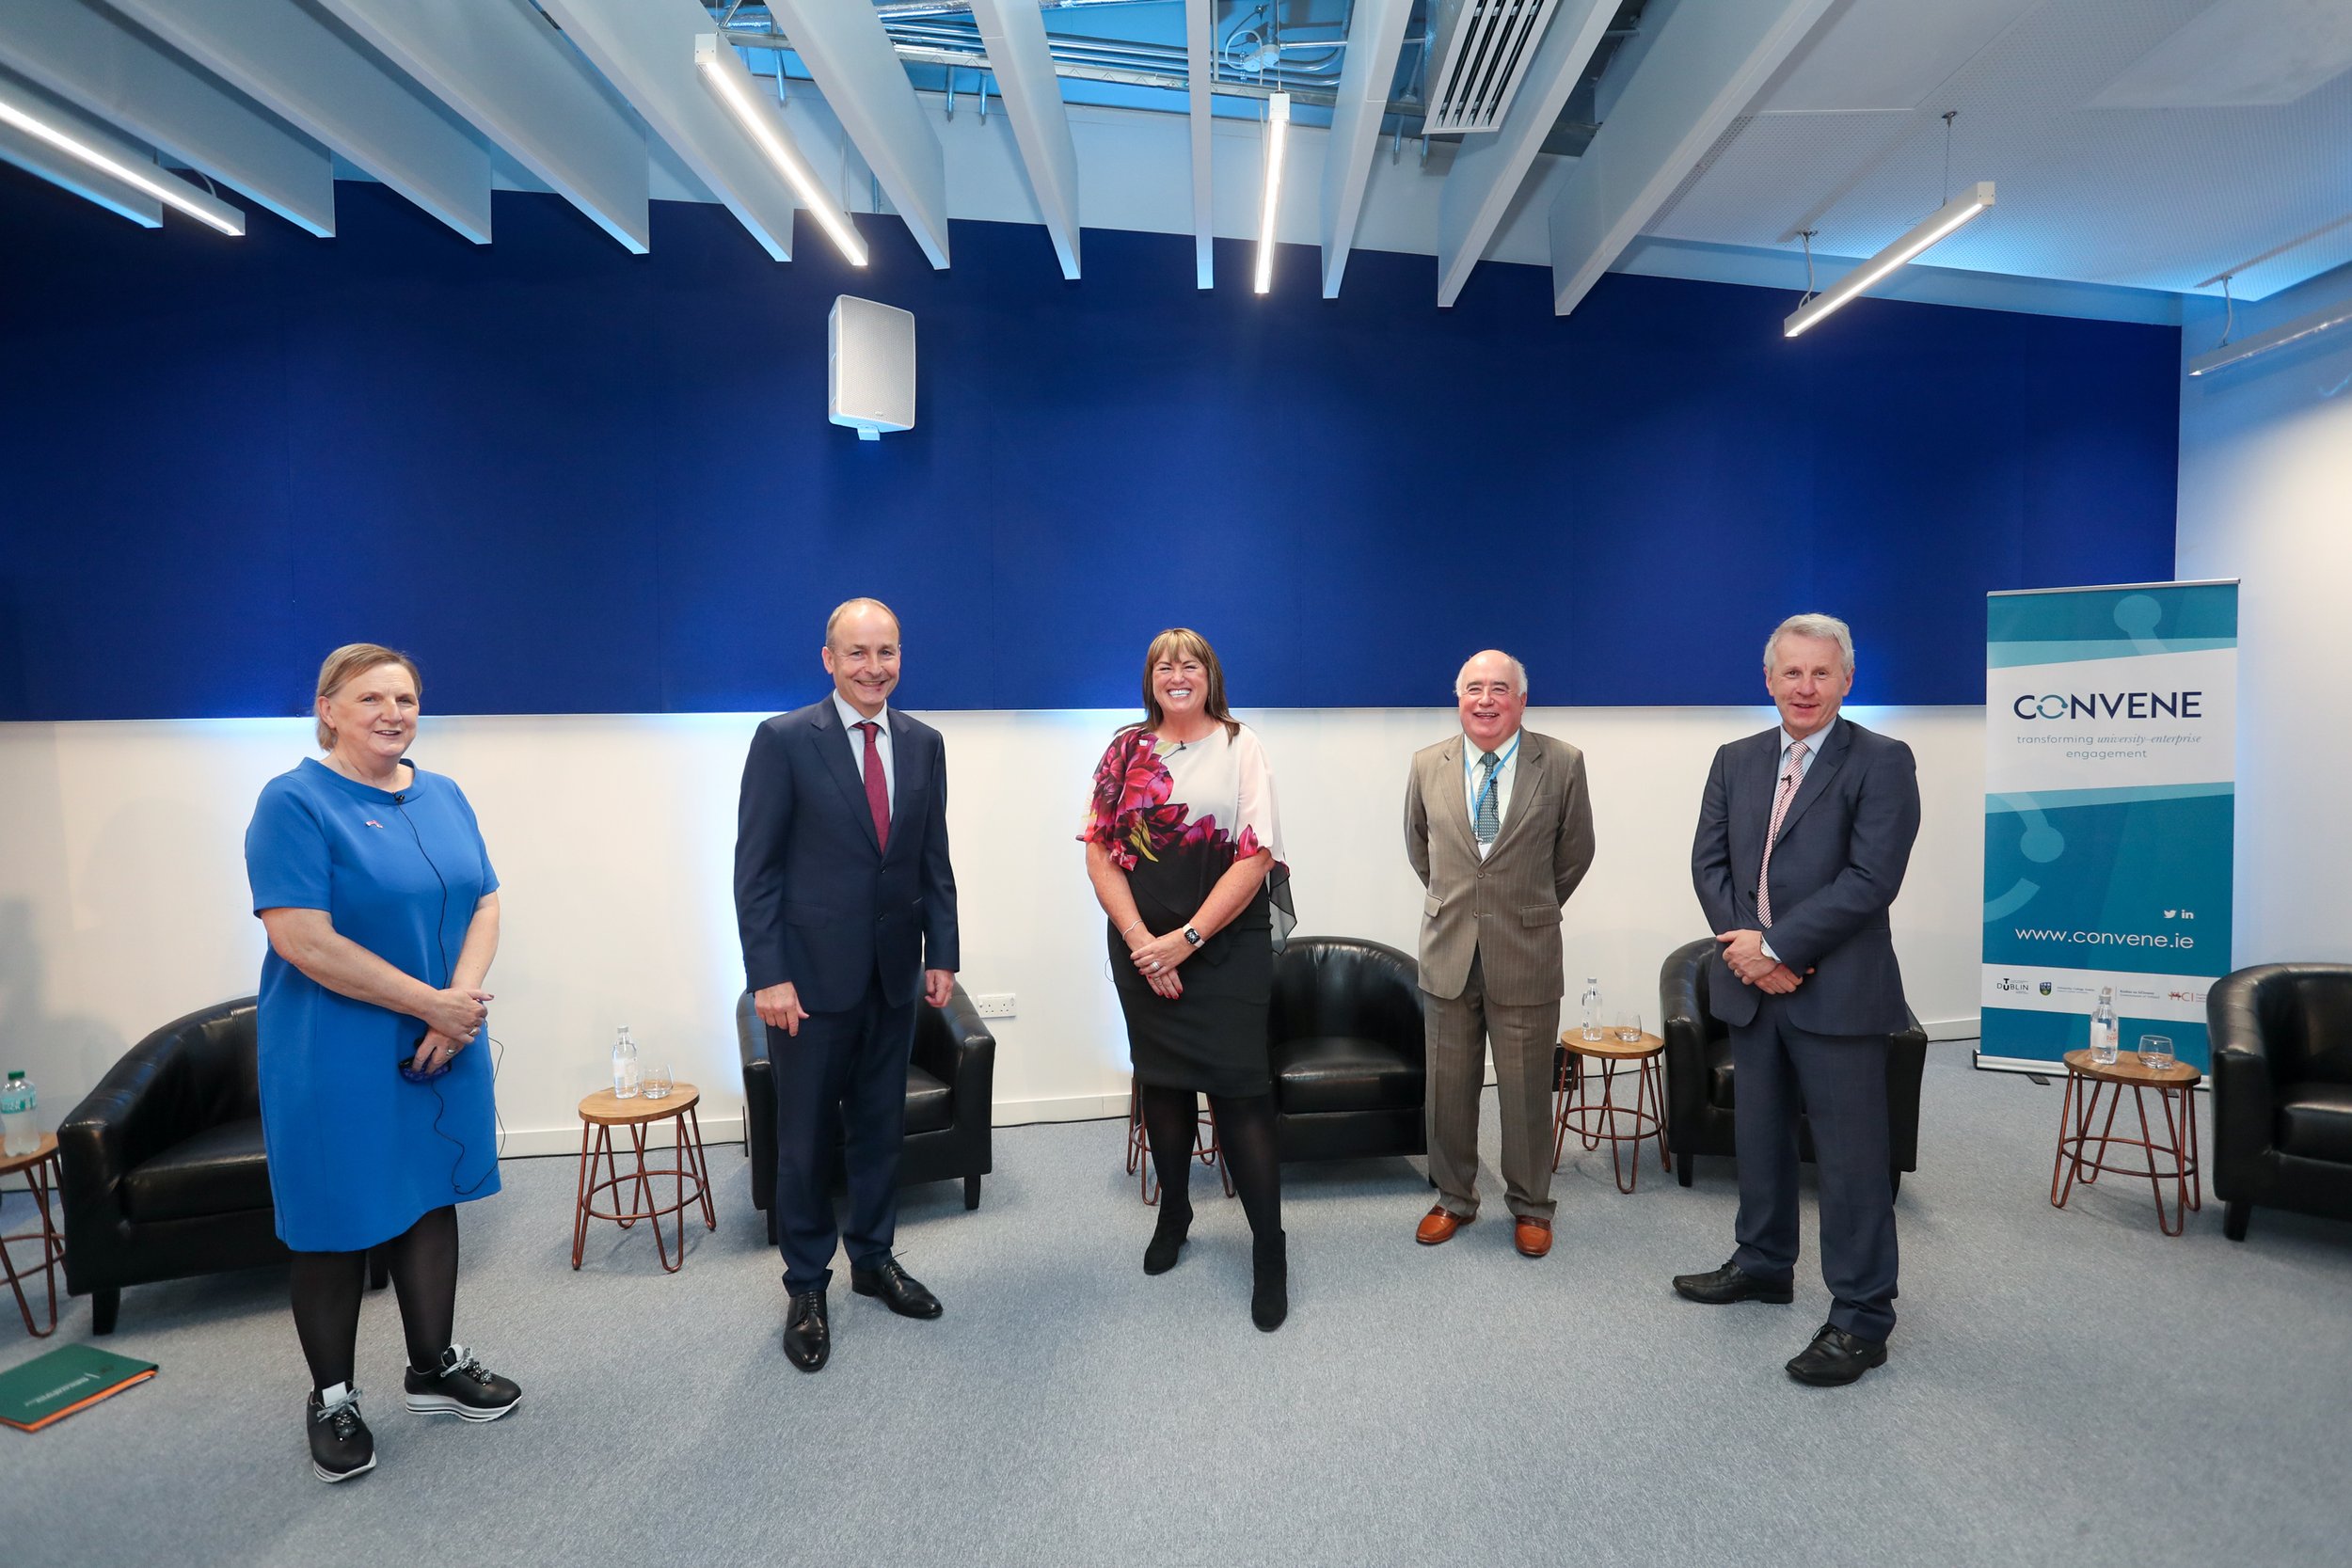  From left to right: Brid Horan, Chancellor, DCU, Taoiseach Micheál Martin, Dr. Andrea Johnson, Vice President, WorkHuman, Michael Horgan, Chairperson, Higher Education Authority, and Jerry O’Sullivan, Deputy Chief Executive, ESB. 